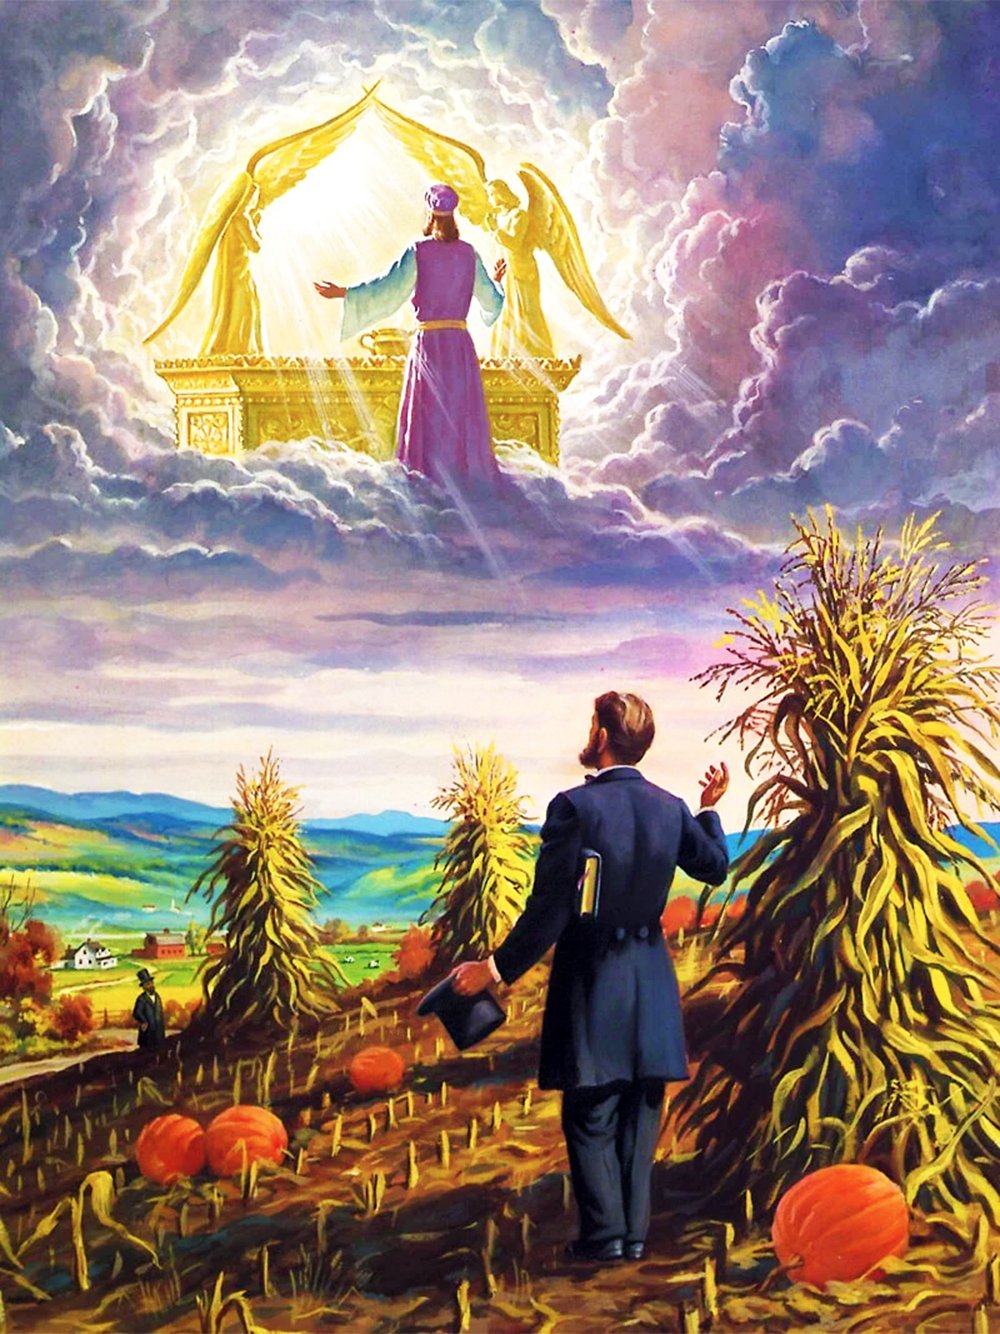 A painting of a man in a suit standing in a field with pumpkins on top of a hill. He is looking towards Jesus Christ in a purple robe standing in front of a golden gate in the sky. The sky is filled with dark clouds. The man is walking through a field of corn stalks and pumpkins. The background is a landscape of rolling hills and a village in the distance.